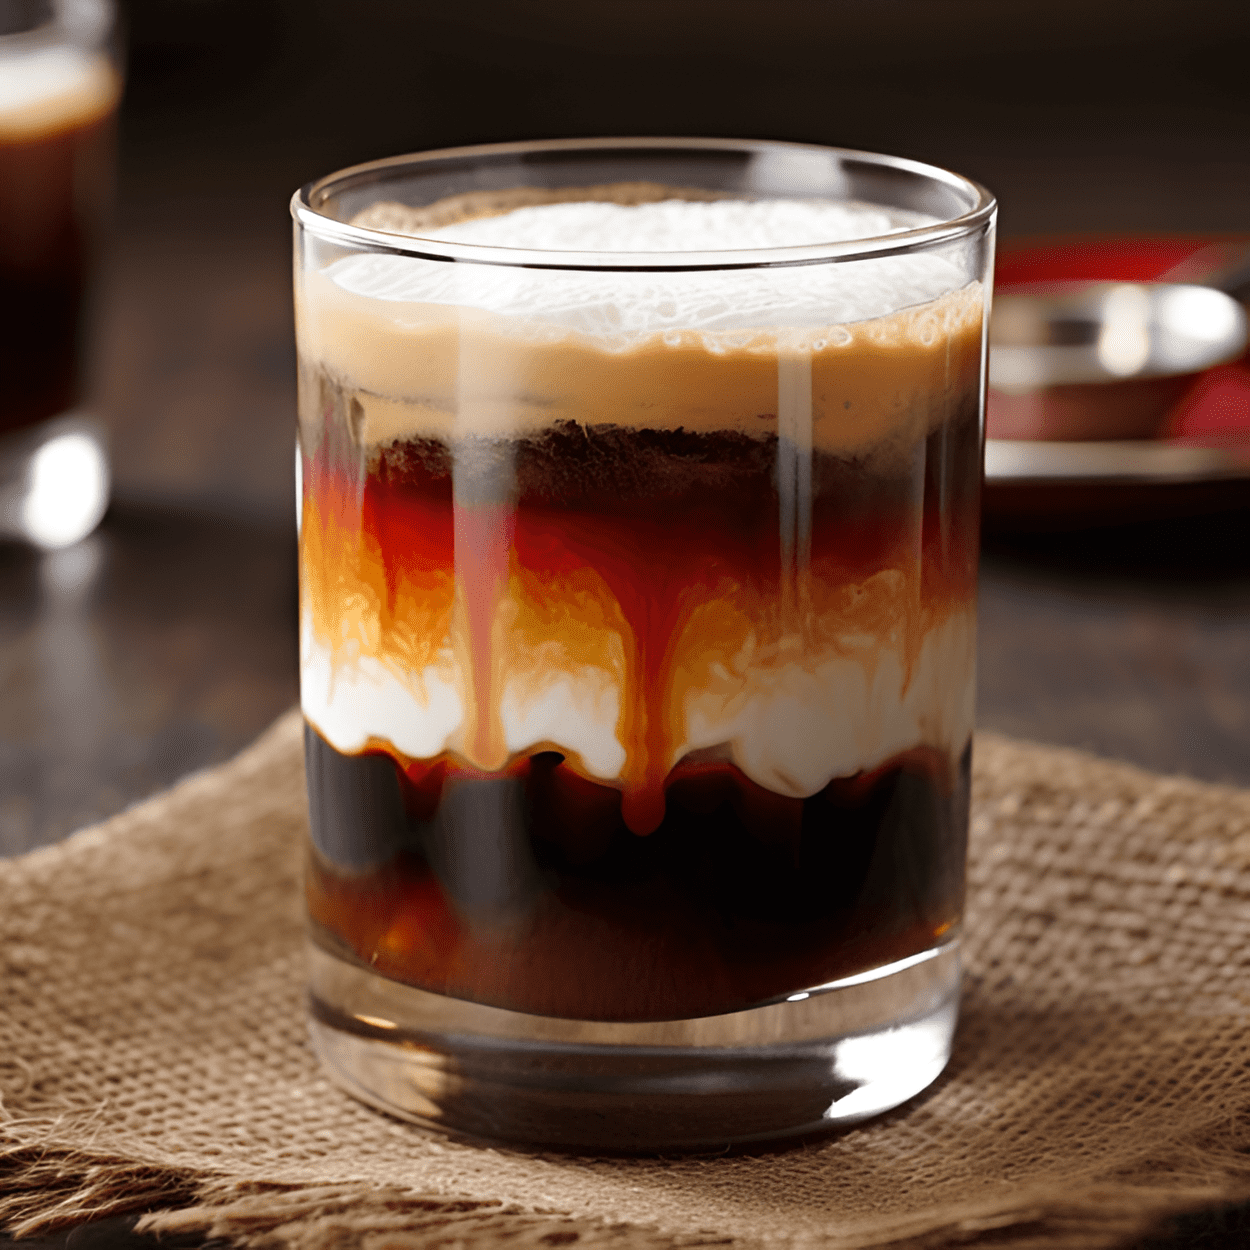 Freddy Krueger Cocktail Recipe - The Freddy Krueger cocktail is a creamy, sweet, and slightly spicy drink. The combination of Irish cream, coffee liqueur, and cinnamon schnapps gives it a unique and delightful flavor.